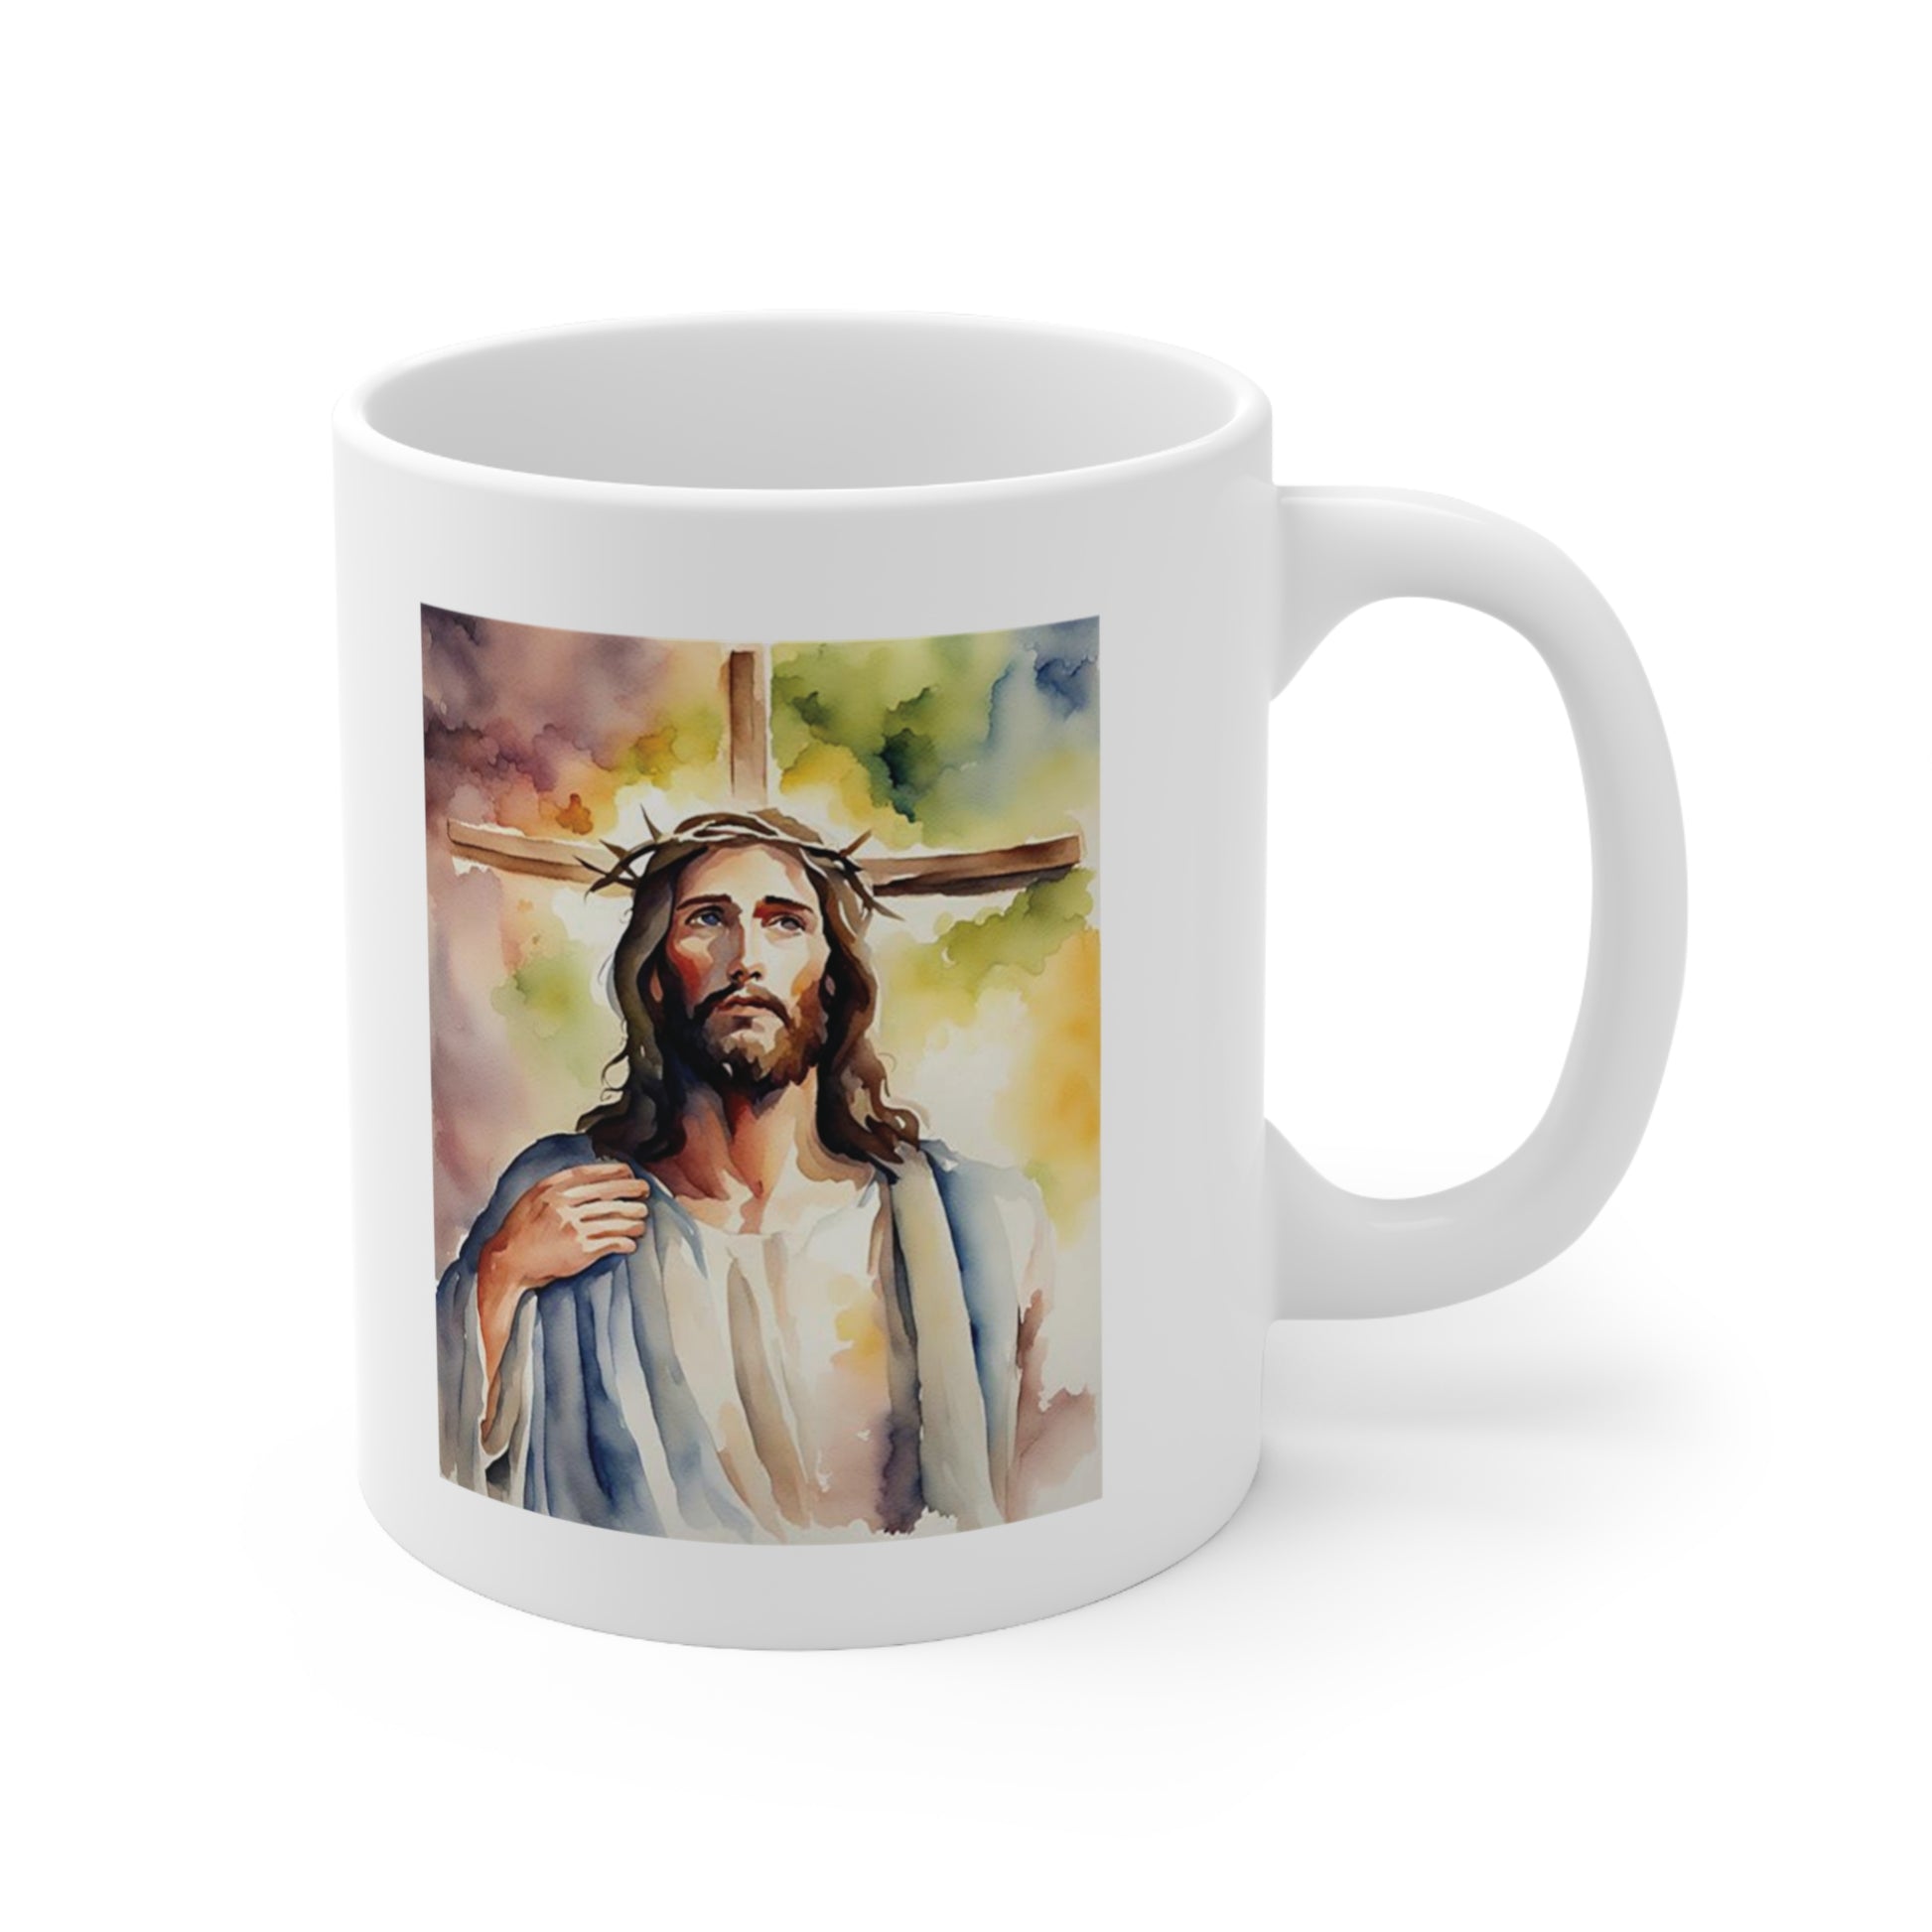 A white ceramic coffee mug with a watercolour painting of Jesus Christ standing in front of a cross